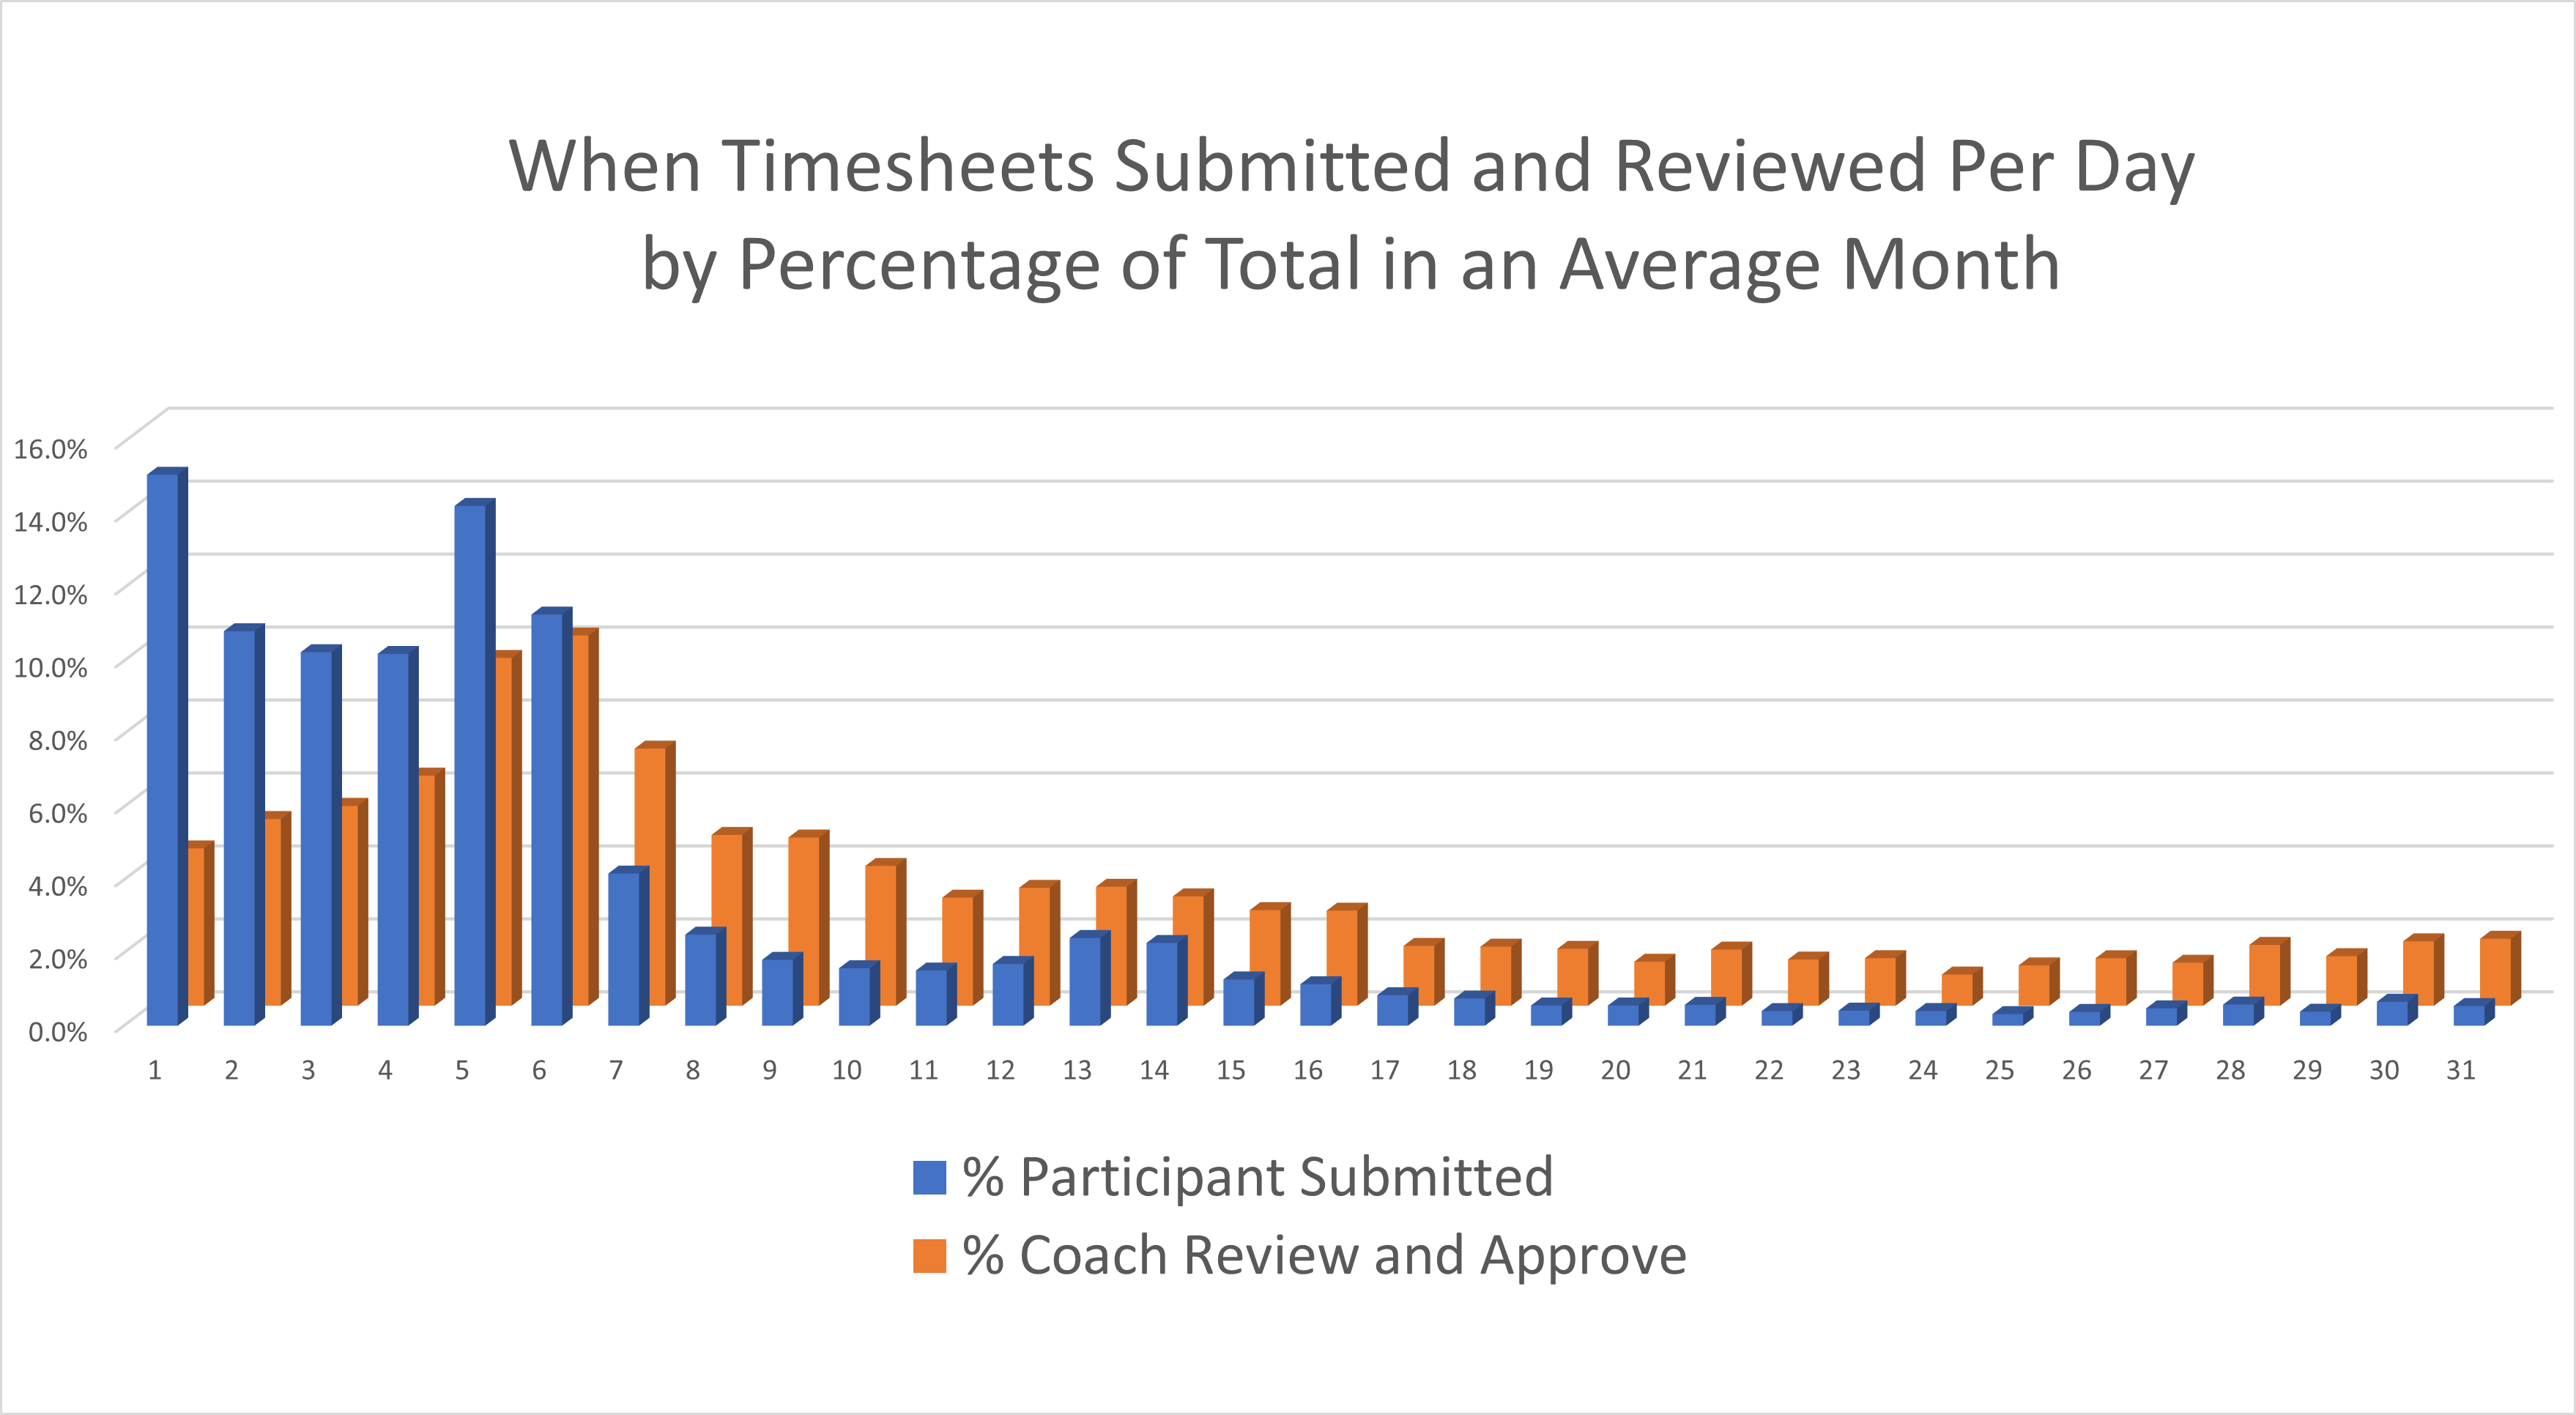 When Timesheets Submitted and Reviewed Per Day by Percentage of Total in an Average Month